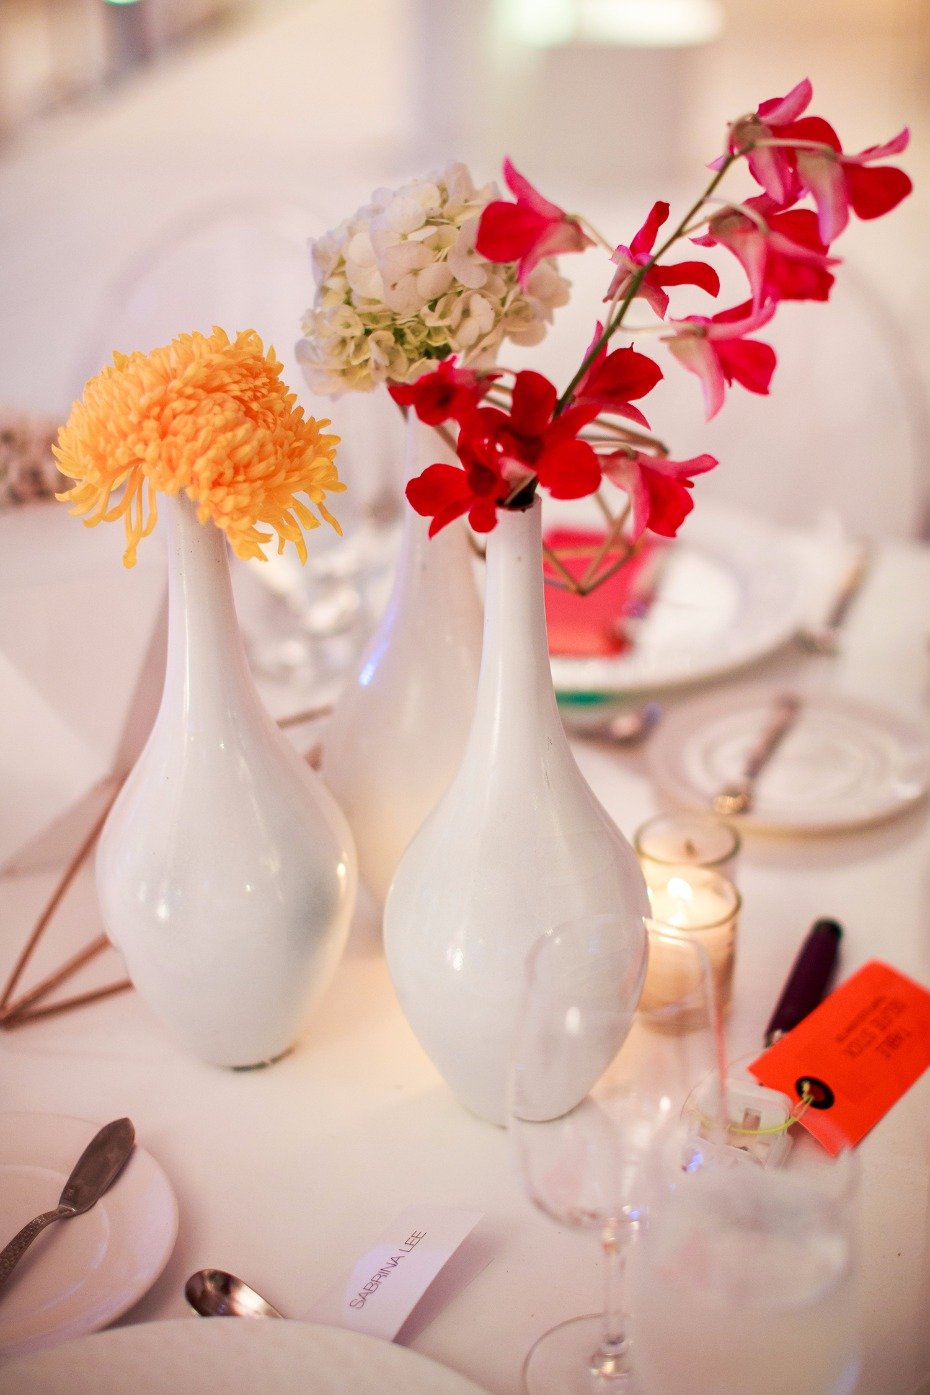 Simple white vases with buds